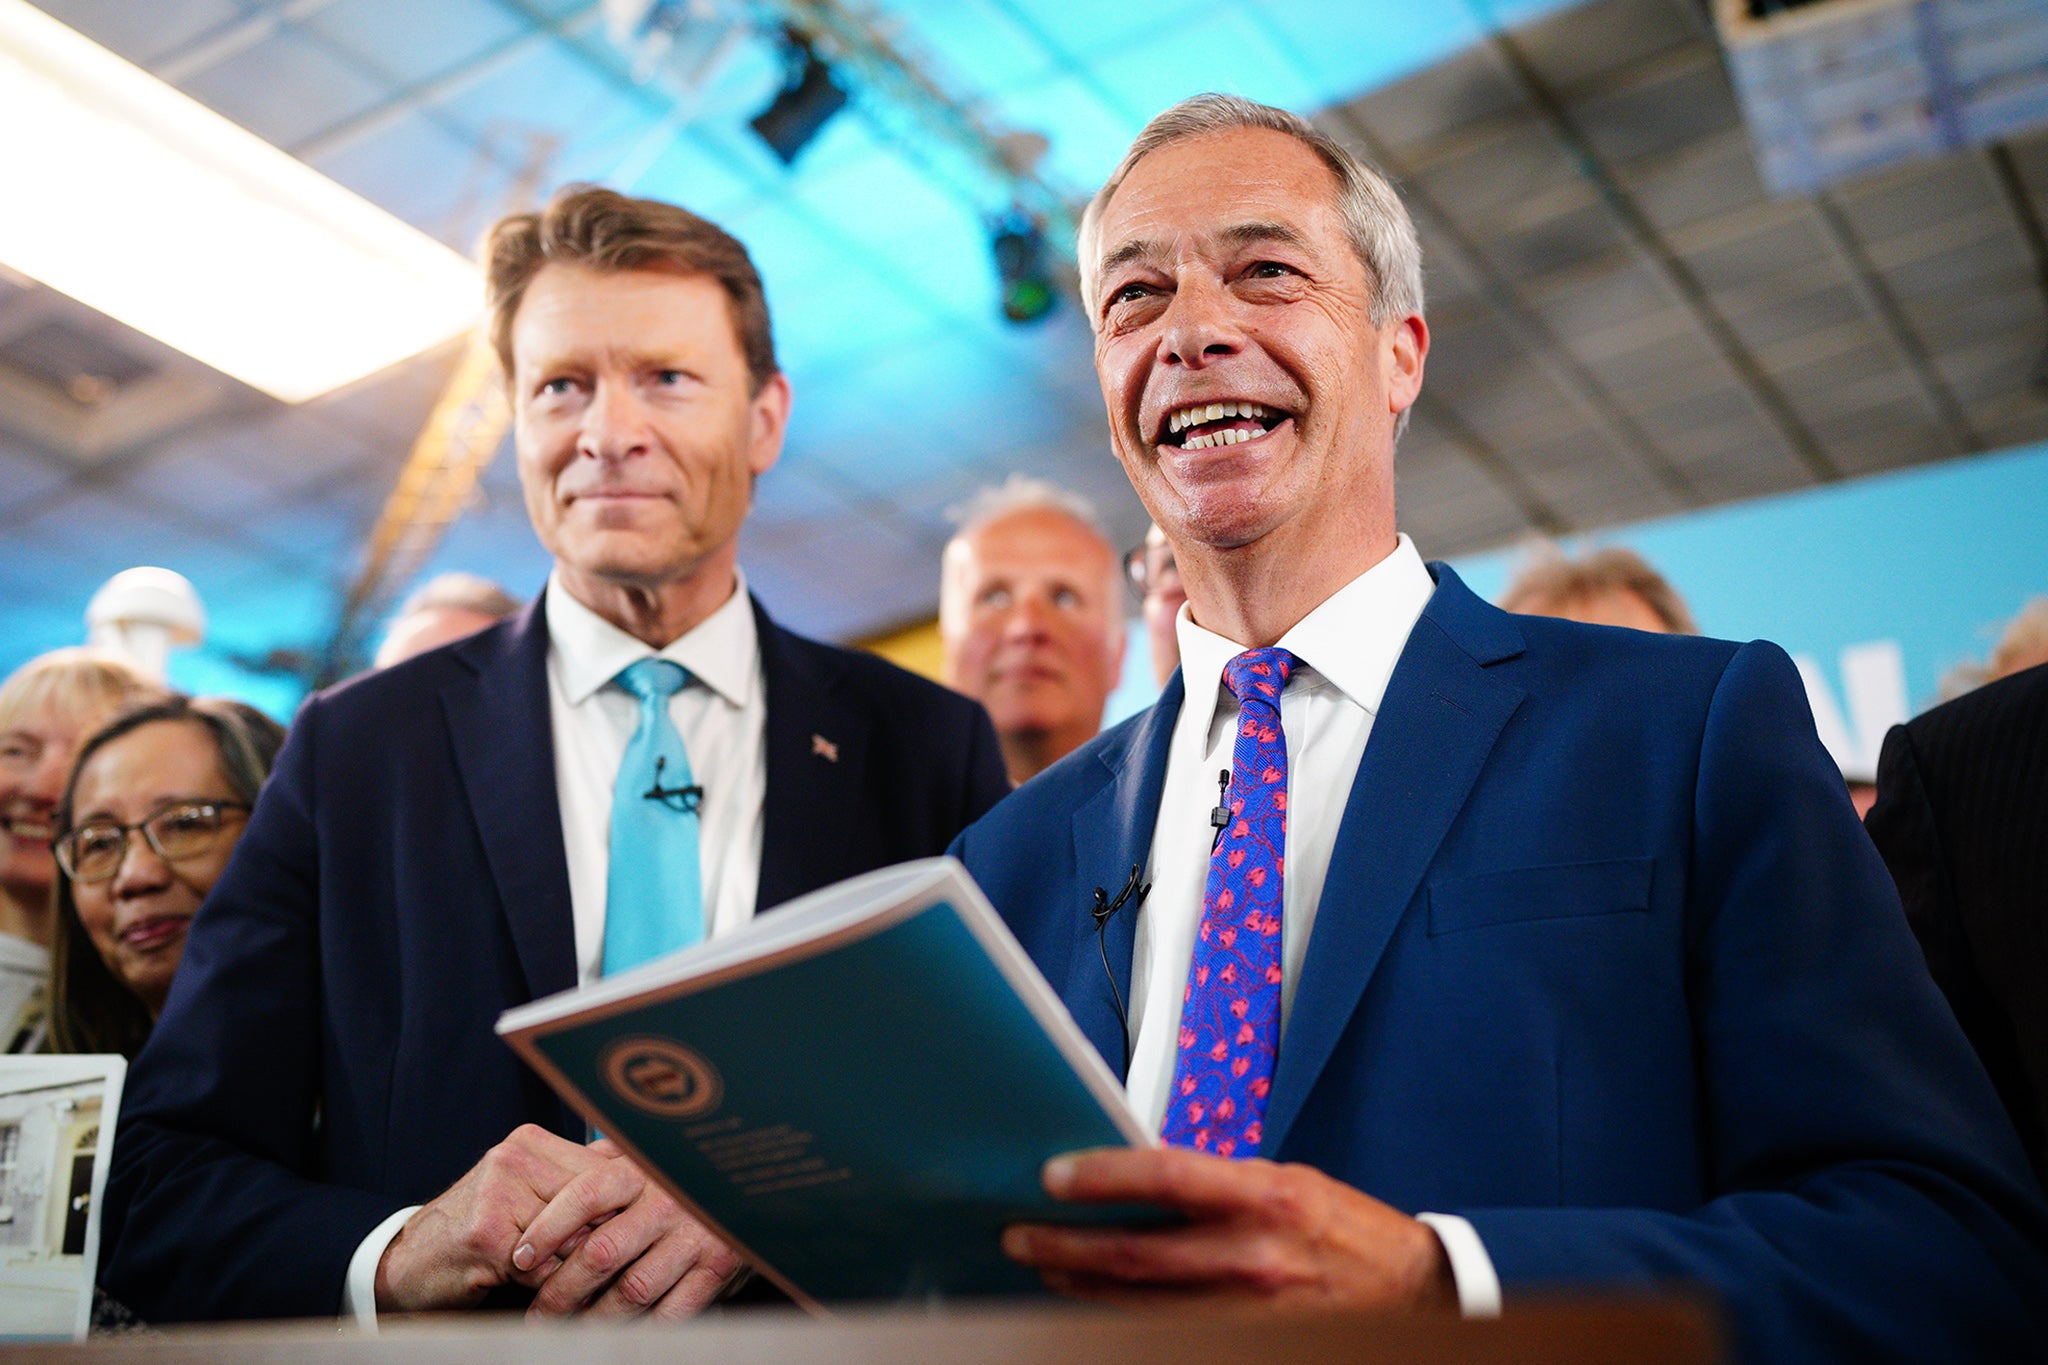 Nigel Farage signed Reform’s contract with voters alongside party chair Richard Tice on Monday